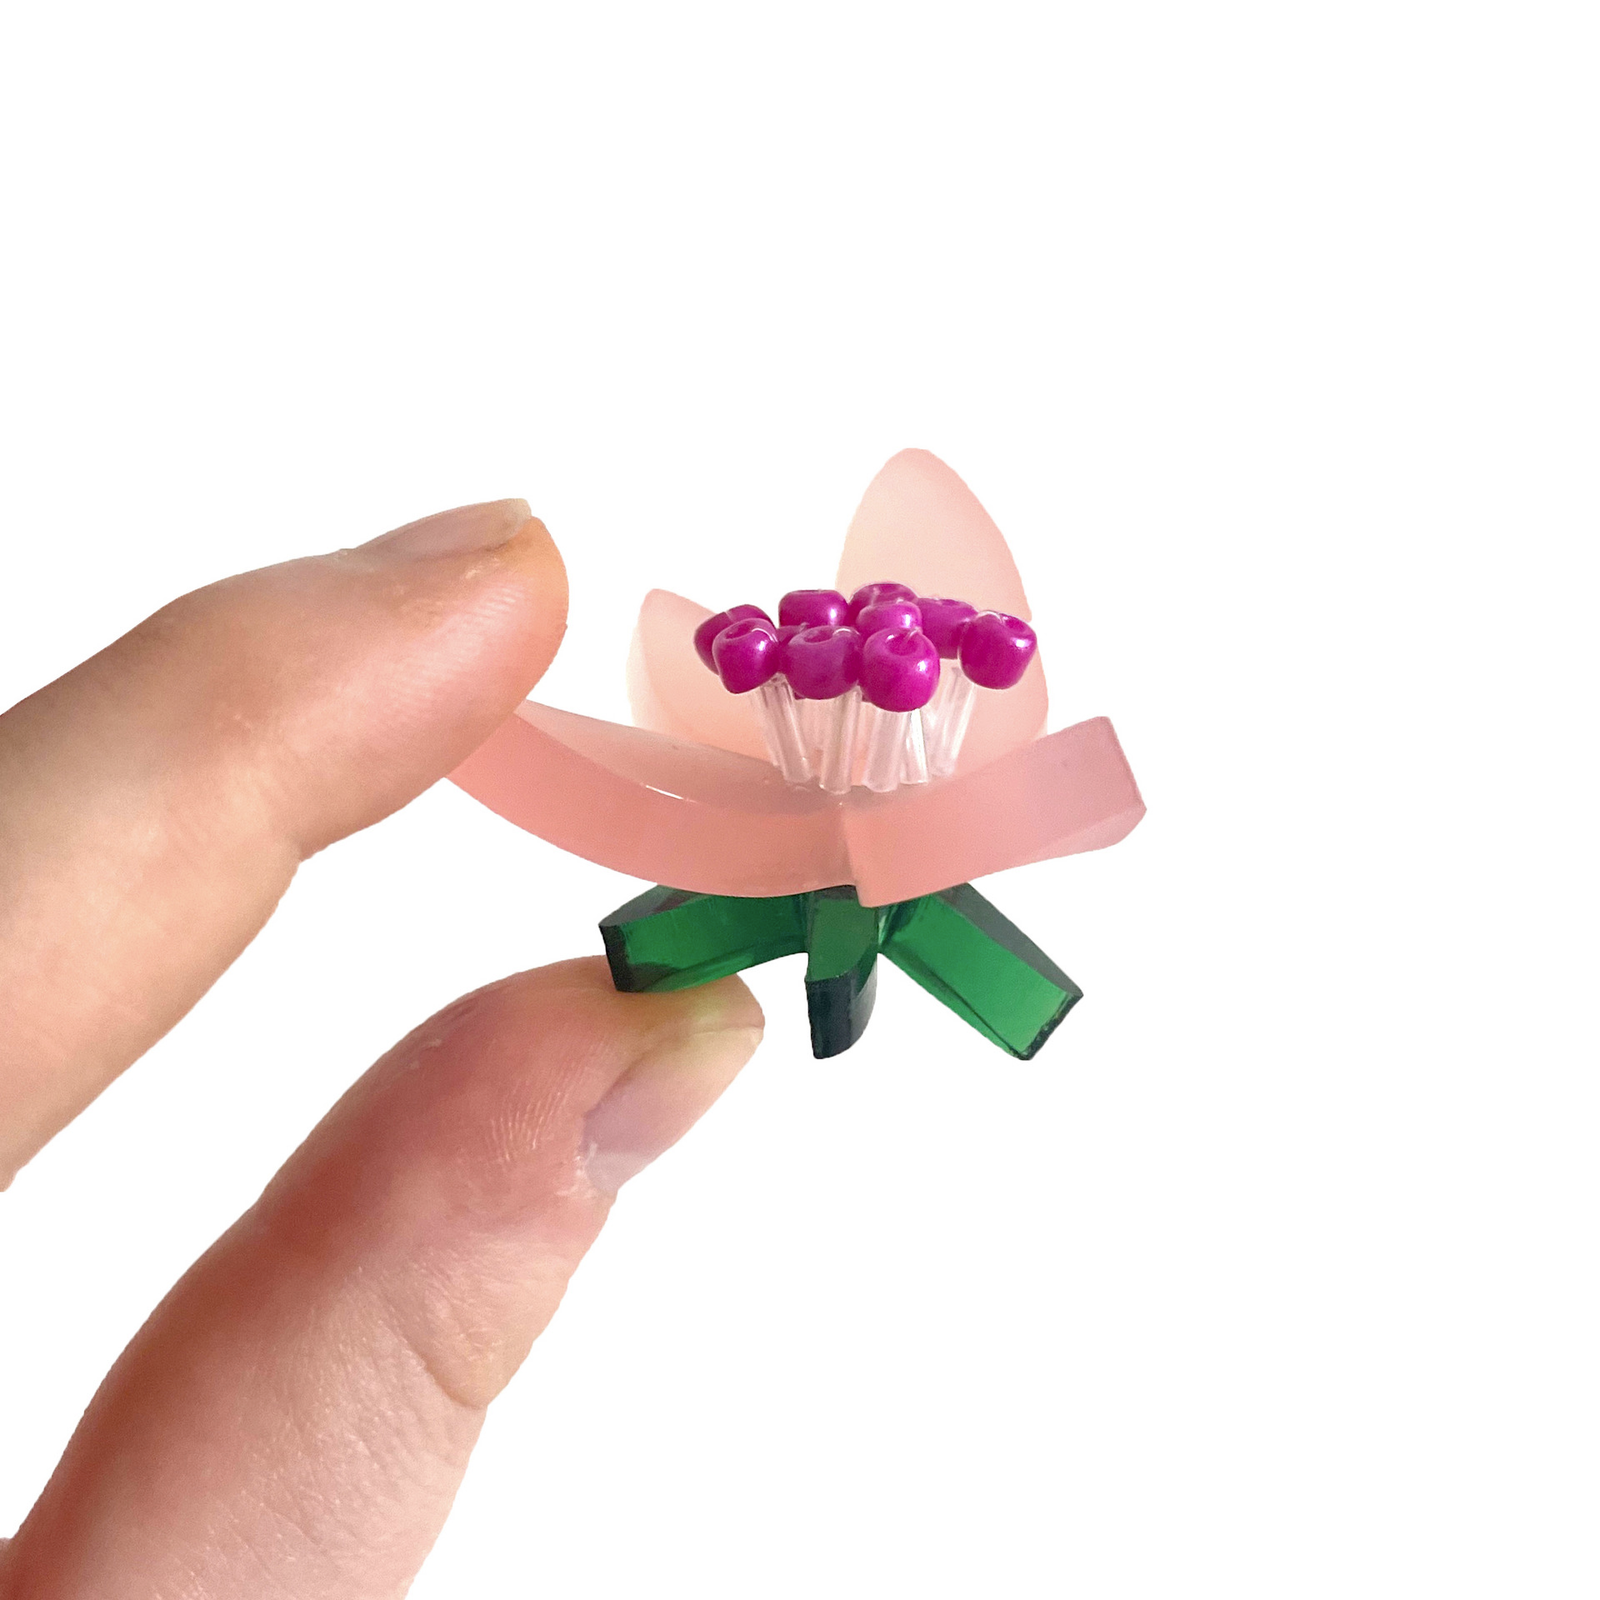 Flower plastic model held between two fingers on a white background. The petals are frosted pink with green leaves. 